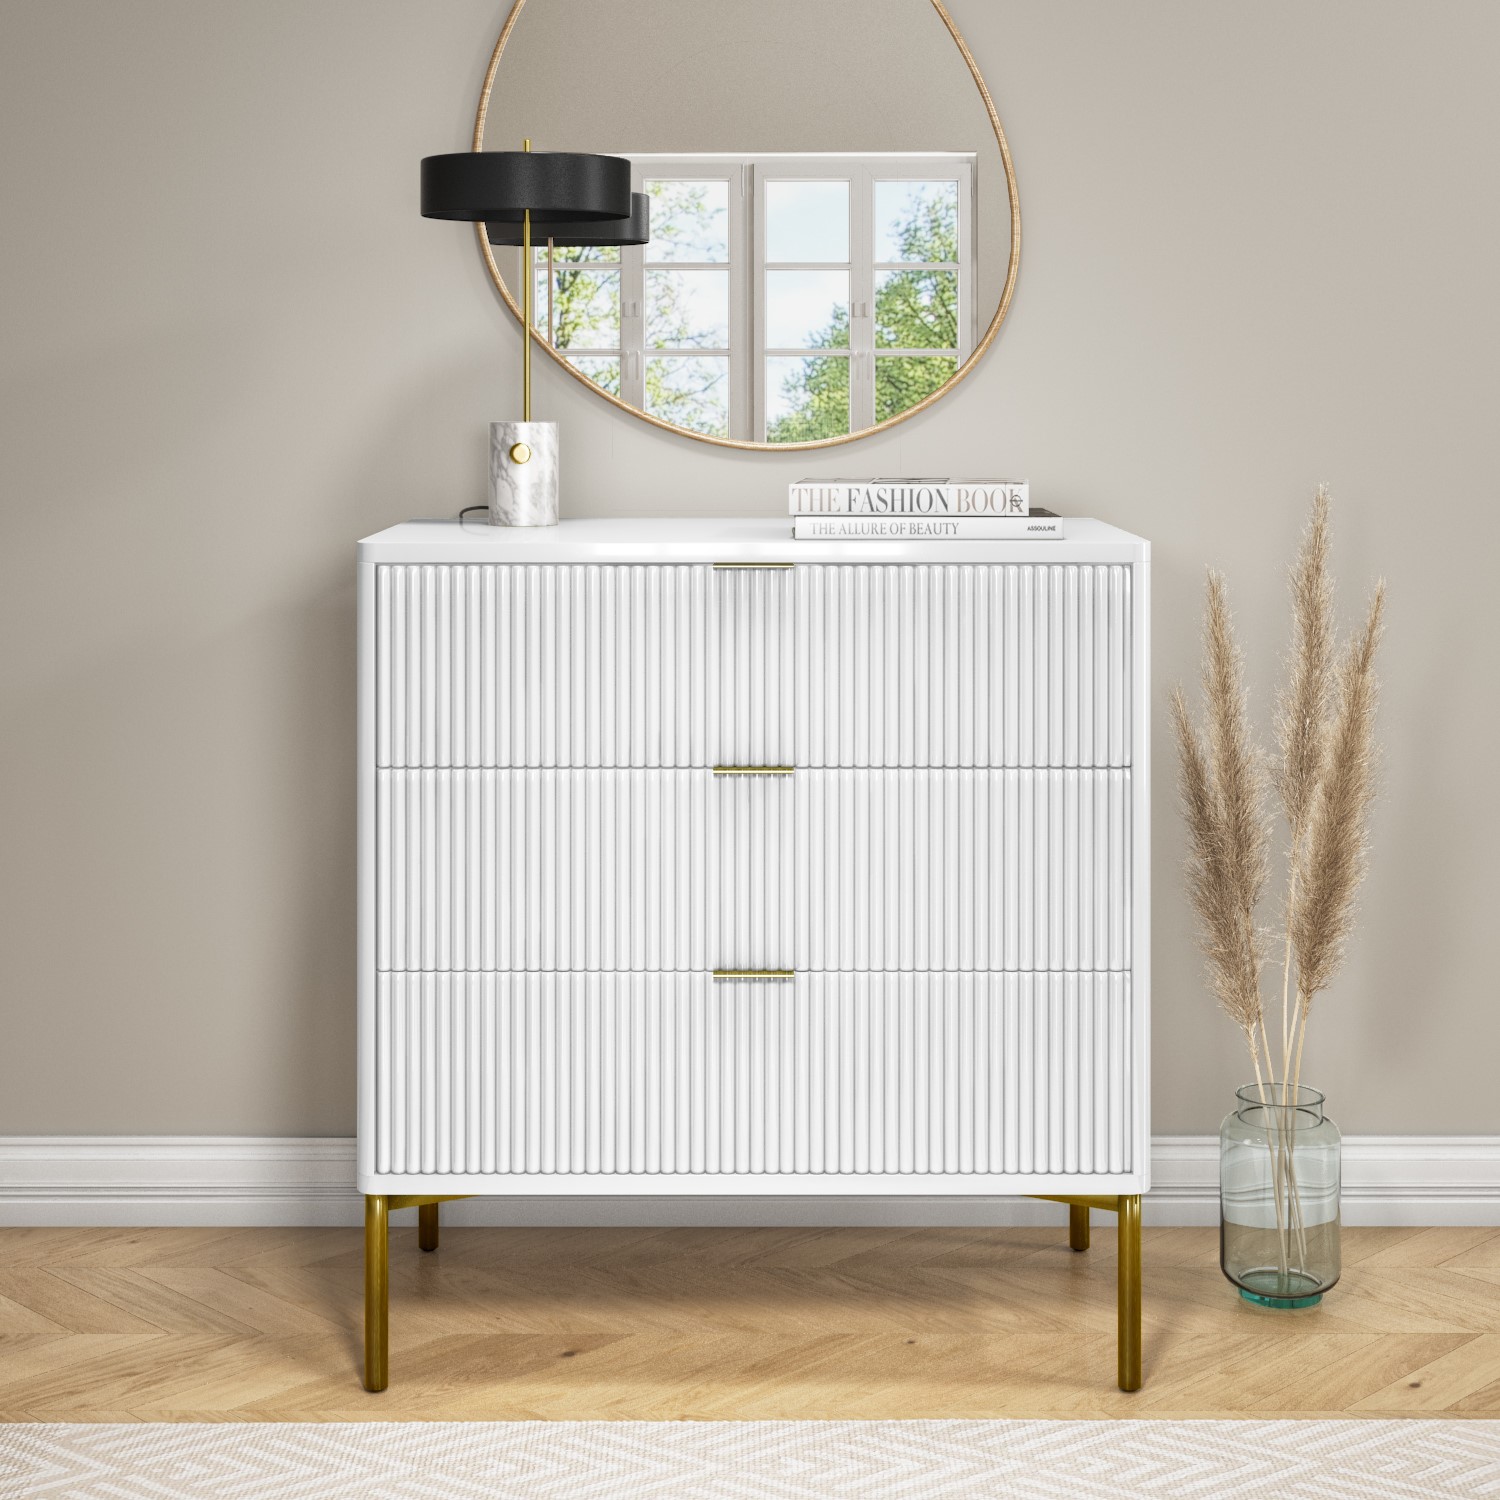 Read more about High gloss white and gold chest of 3 drawers valencia